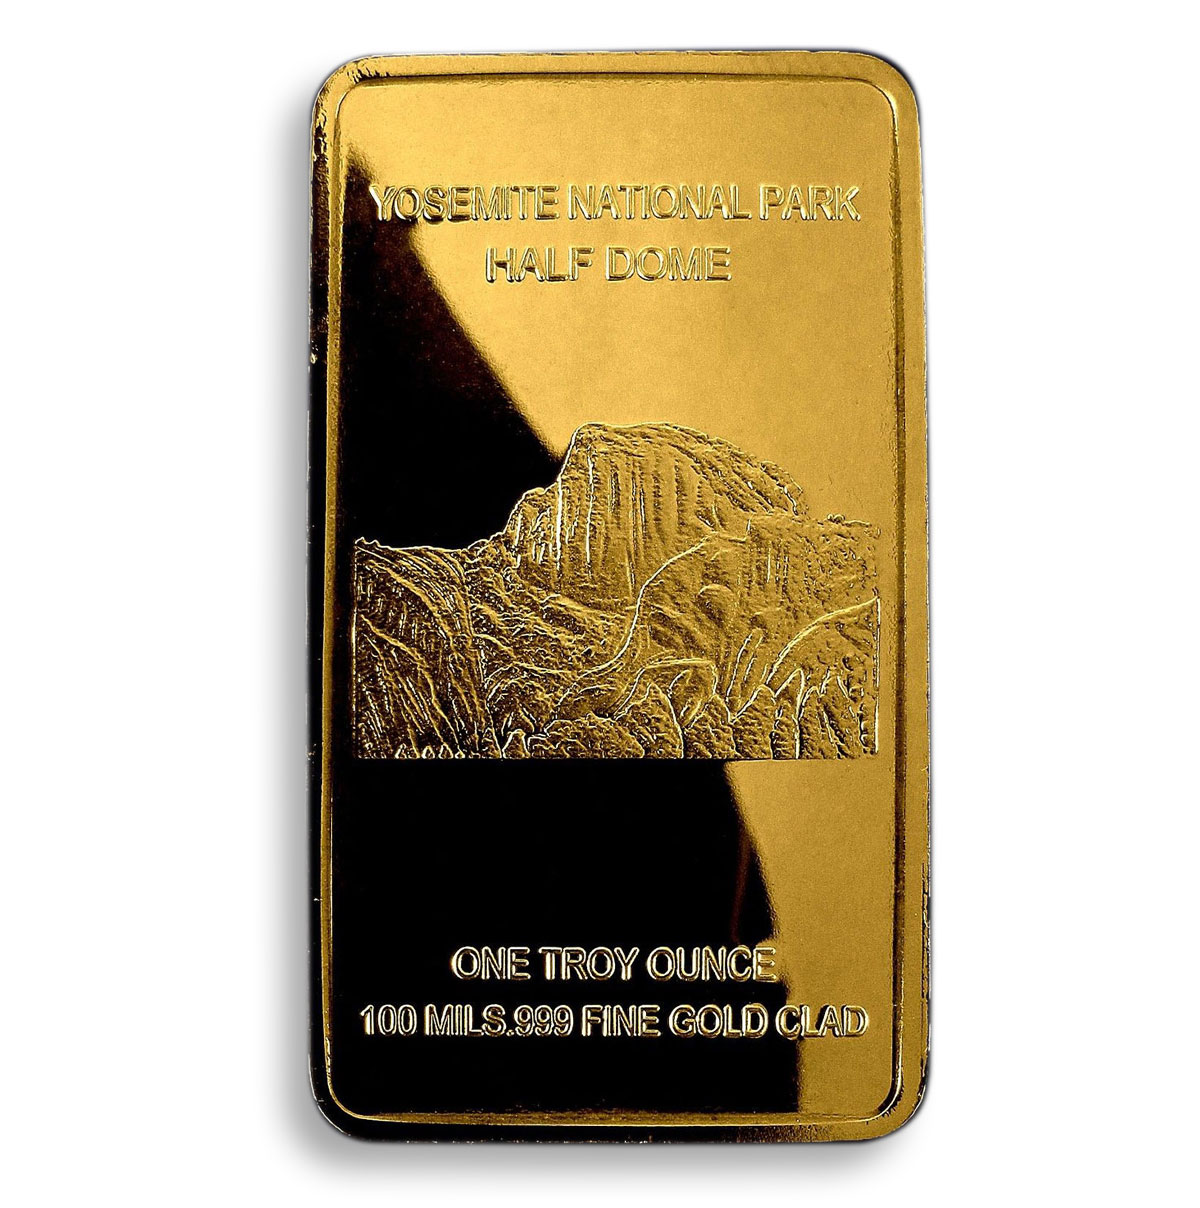 Yosemite National Park, &quot;HALF DOME&quot; , Endangered Timber Wolf, Gold Plated Bar